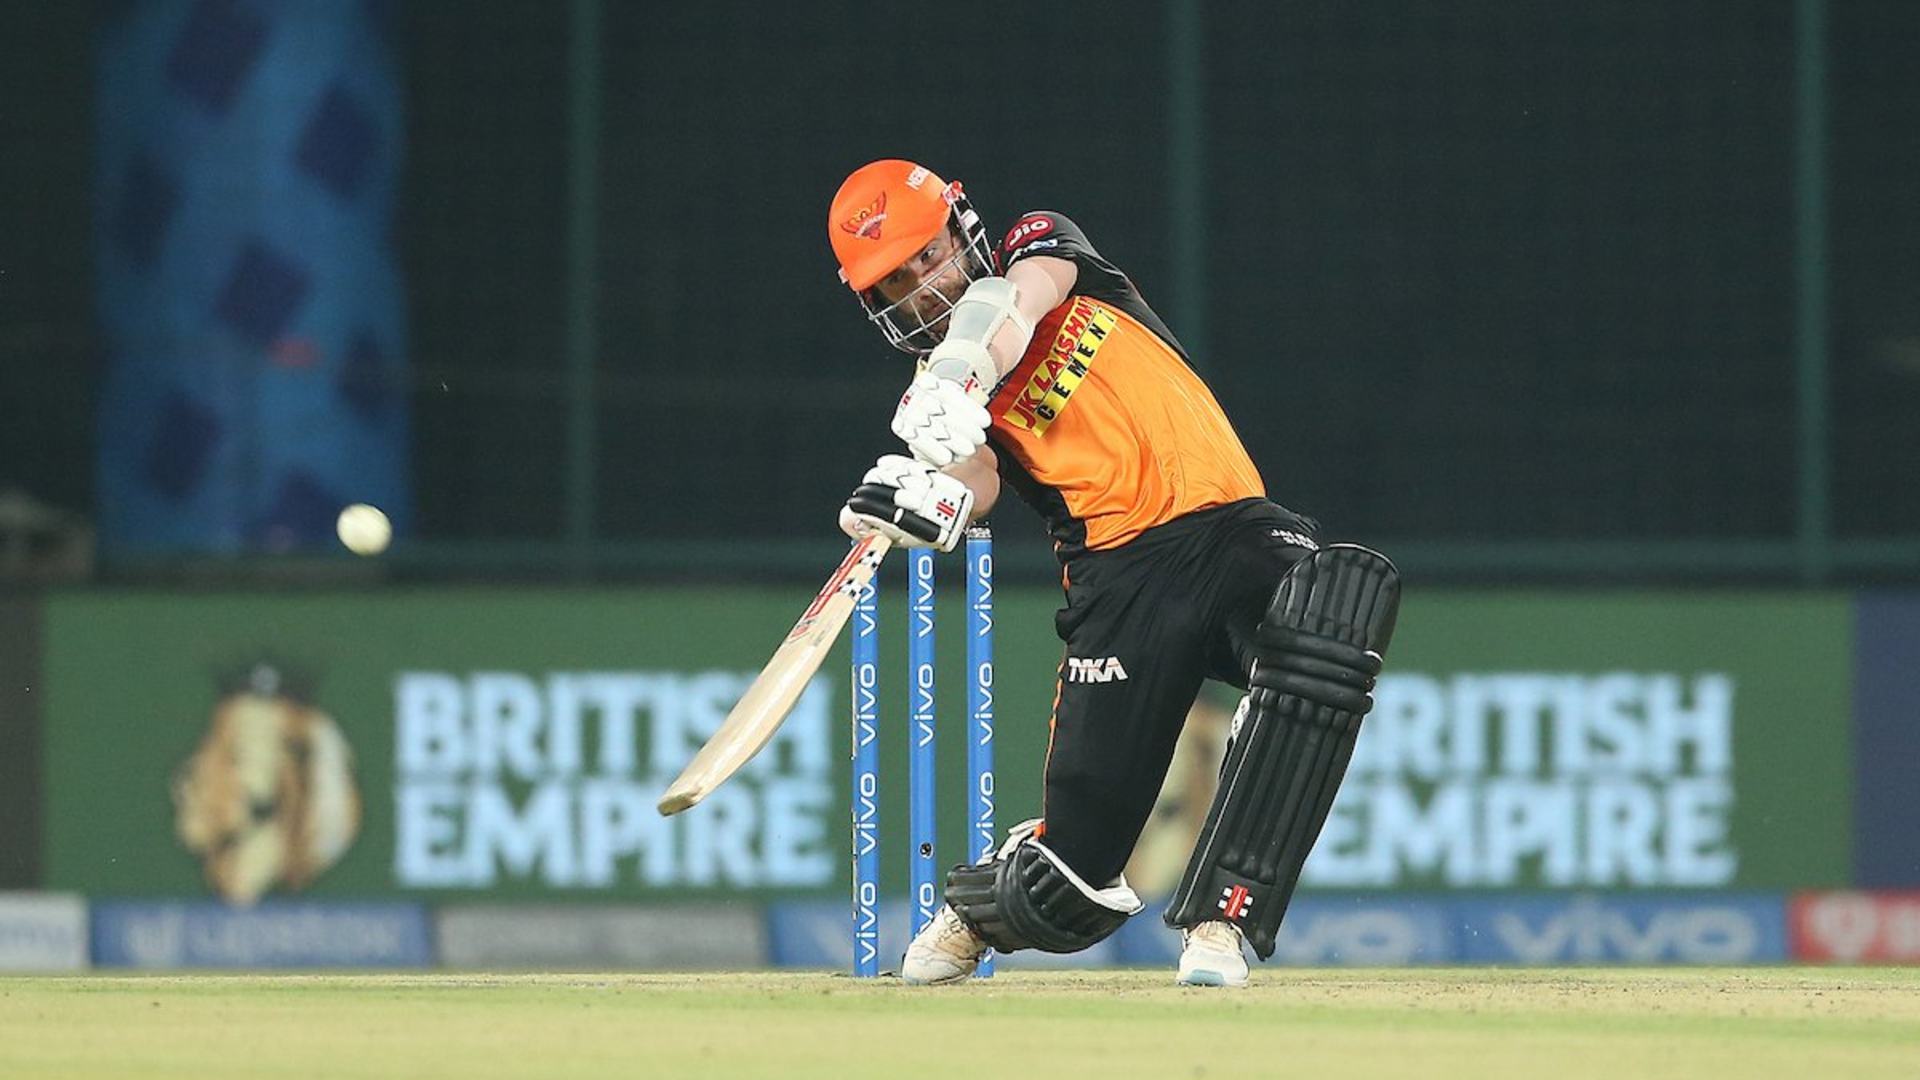 Kane Williamson could well help SRH make a comeback in IPL 2021. (Image Credit: Twitter)